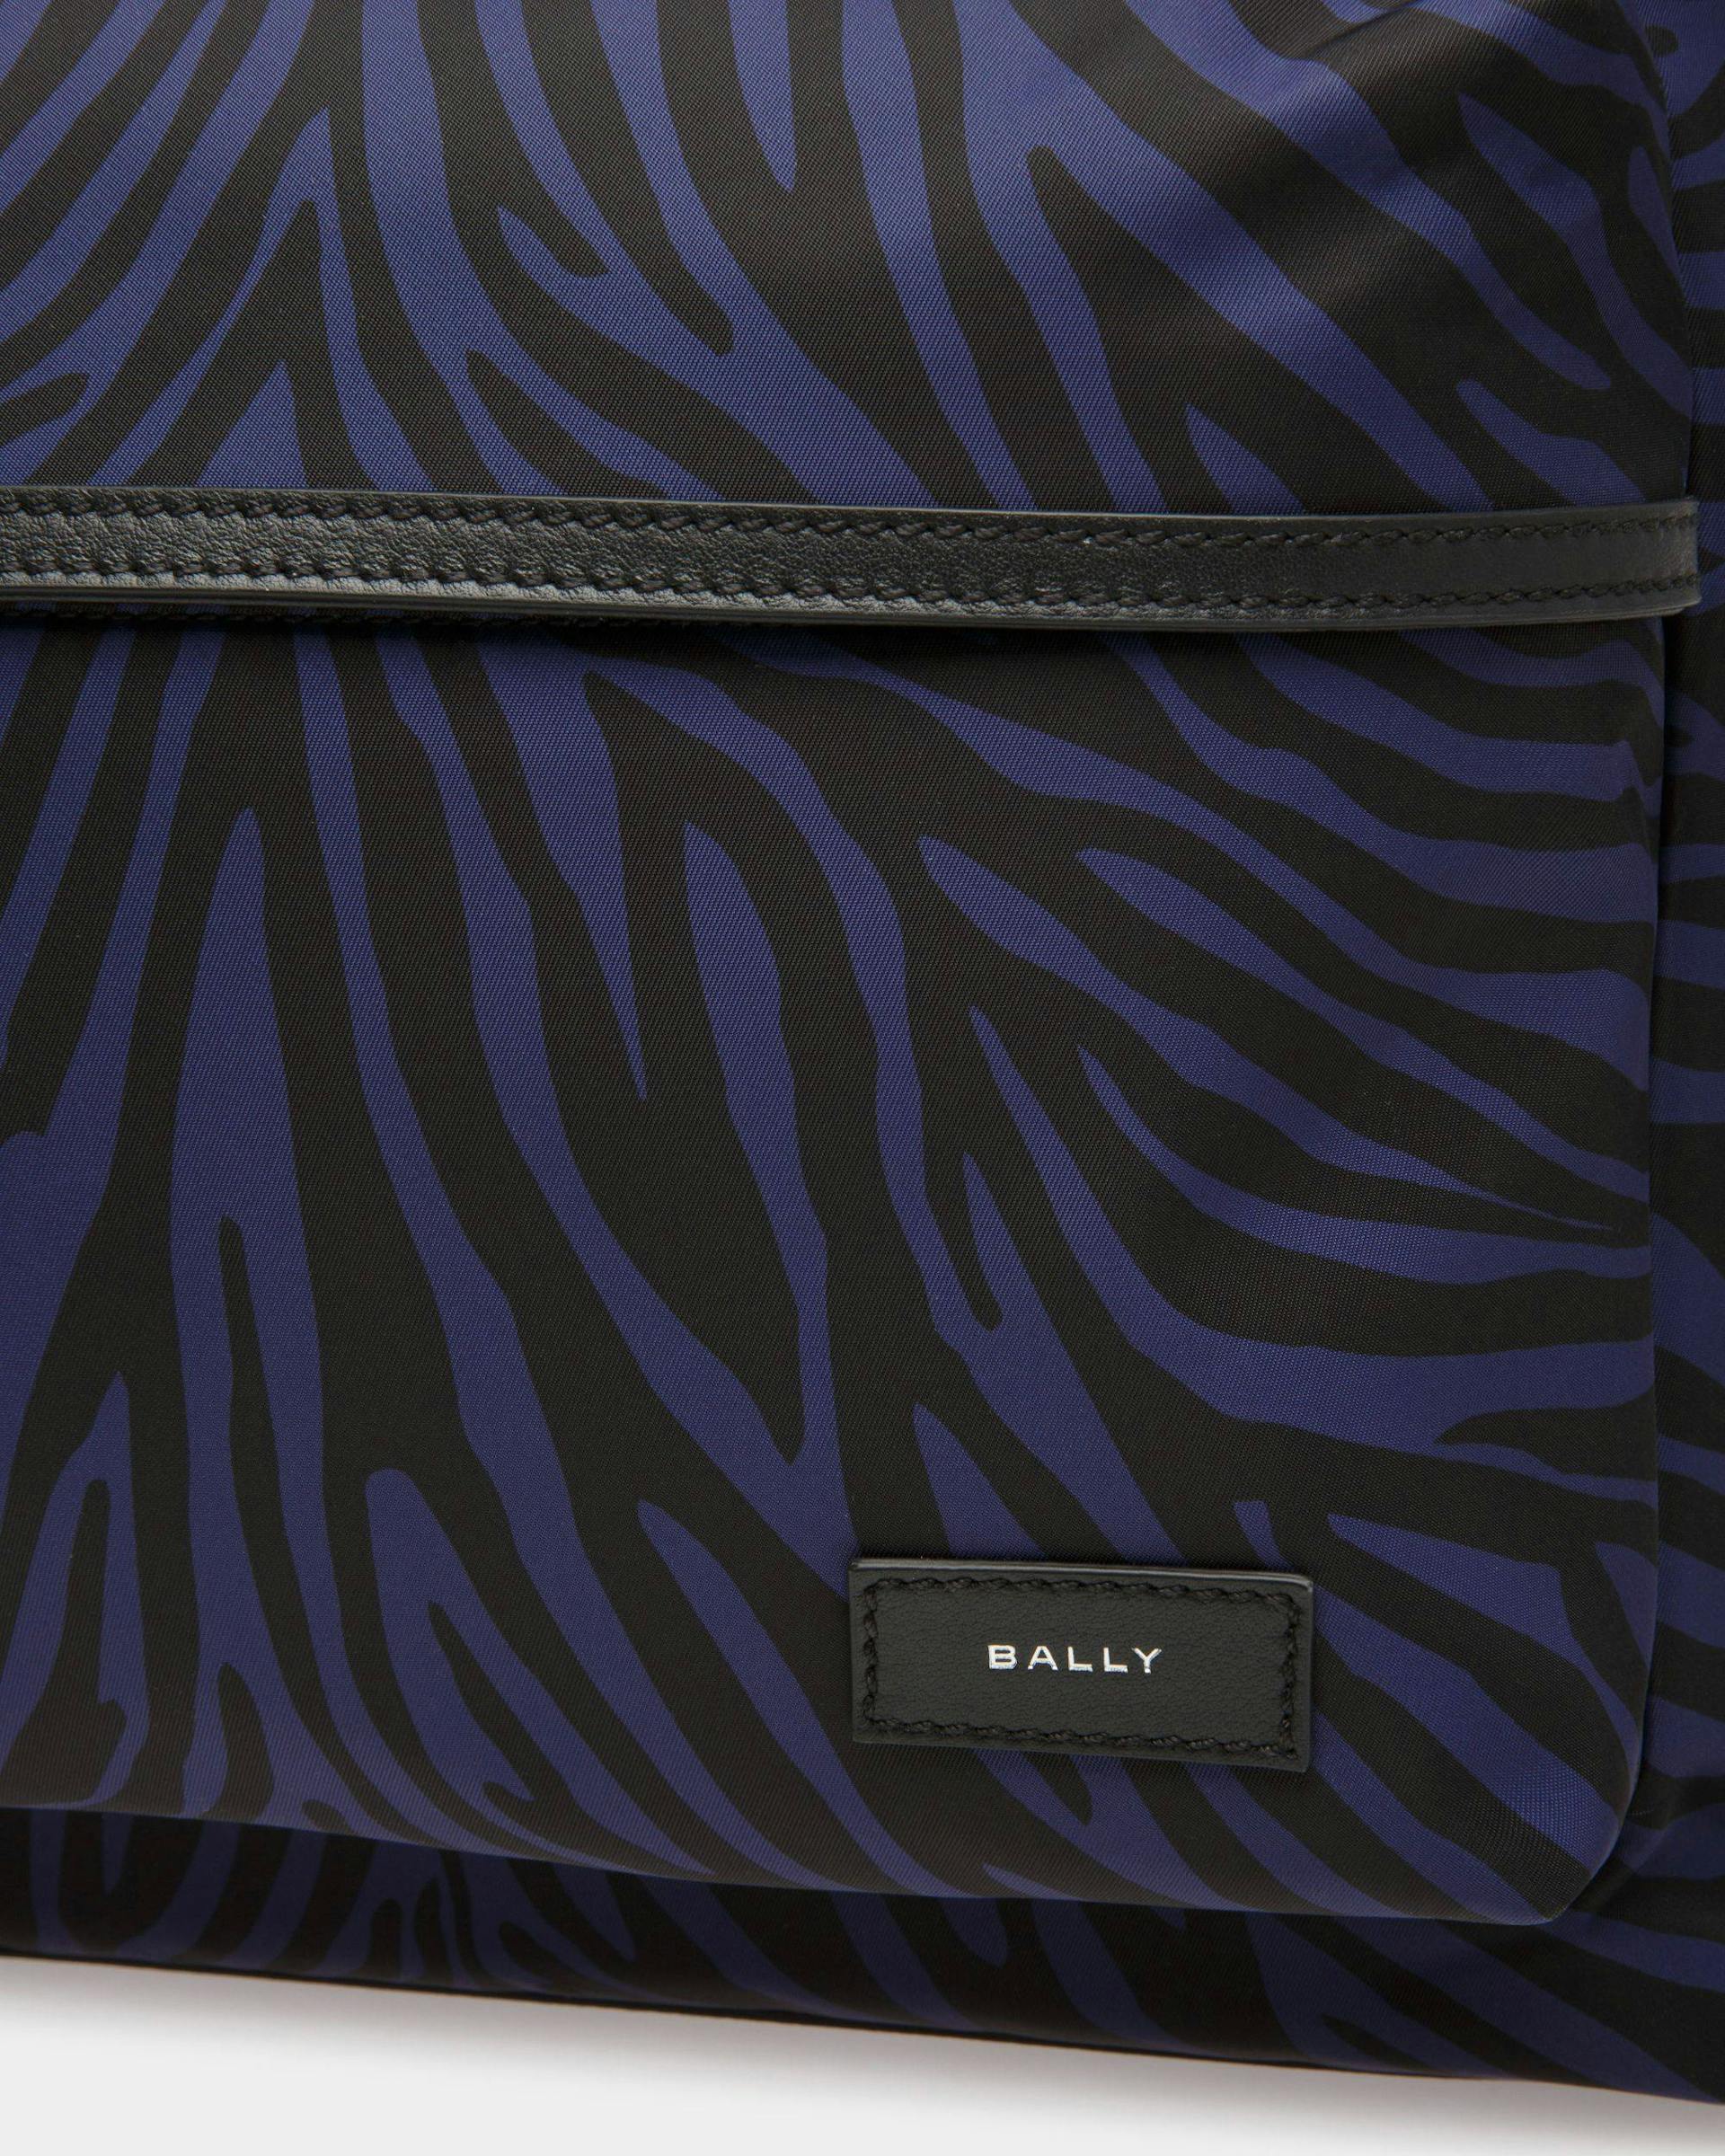 Men's Zebra Crossing Backpack In Marine And Black Fabric And Nylon | Bally | Still Life Detail